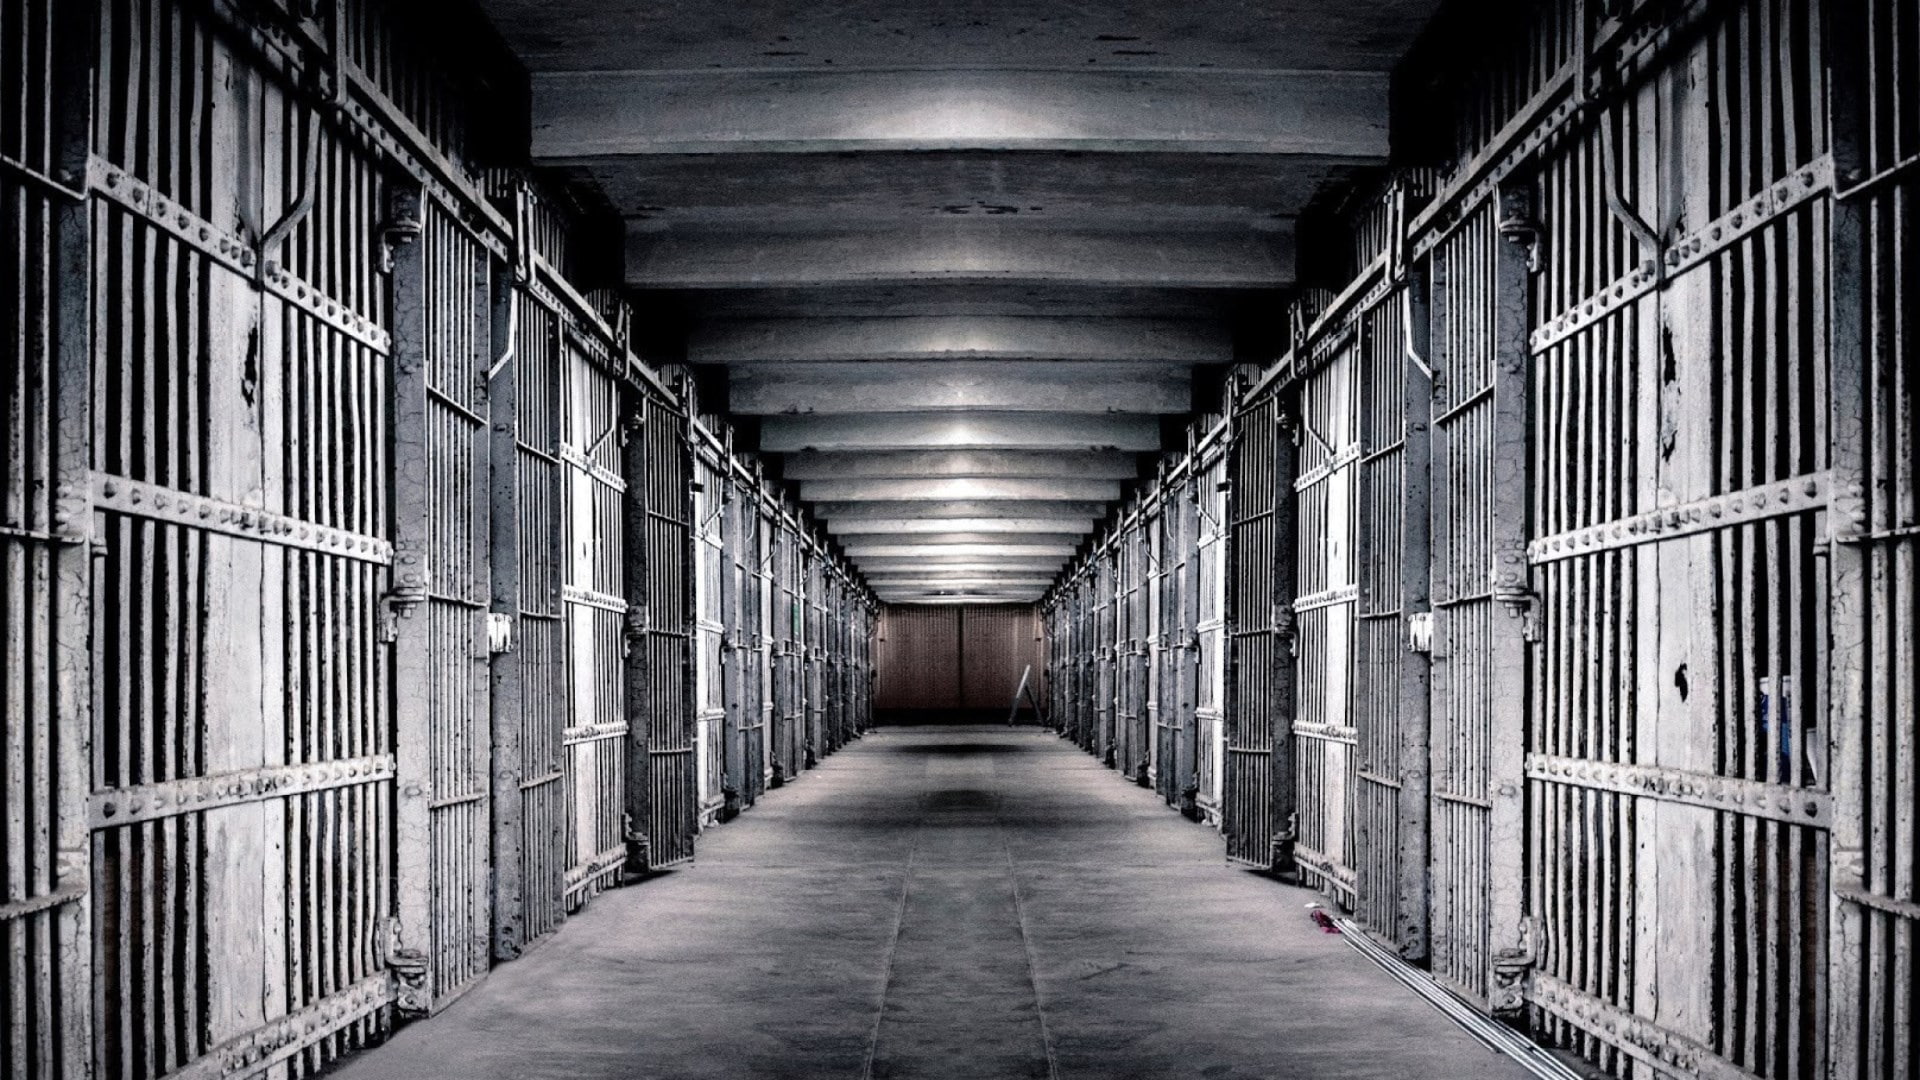 prison, architecture, the way forward, indoors, direction, building